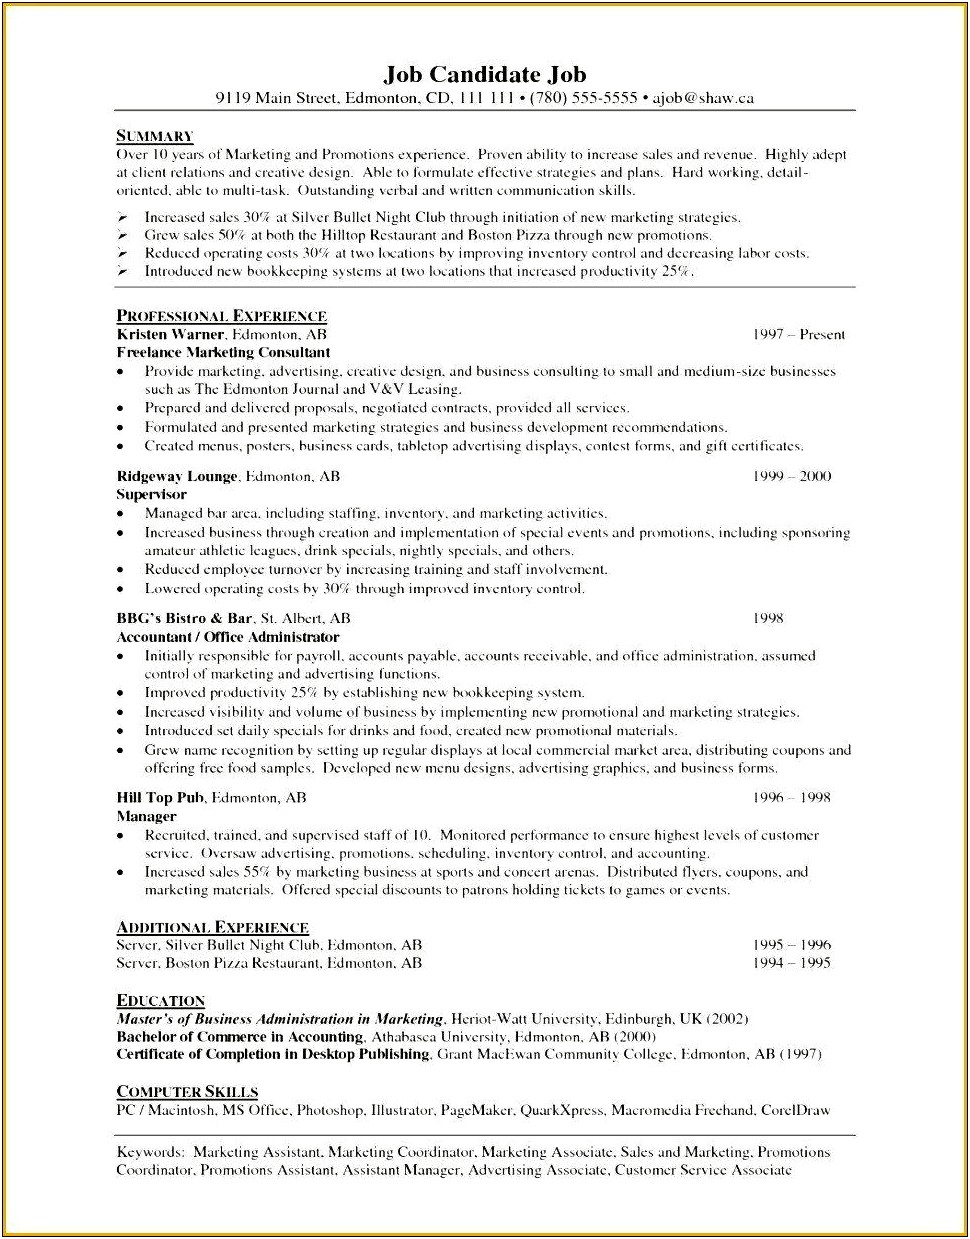 Resume Objectives For Metal Fabrication